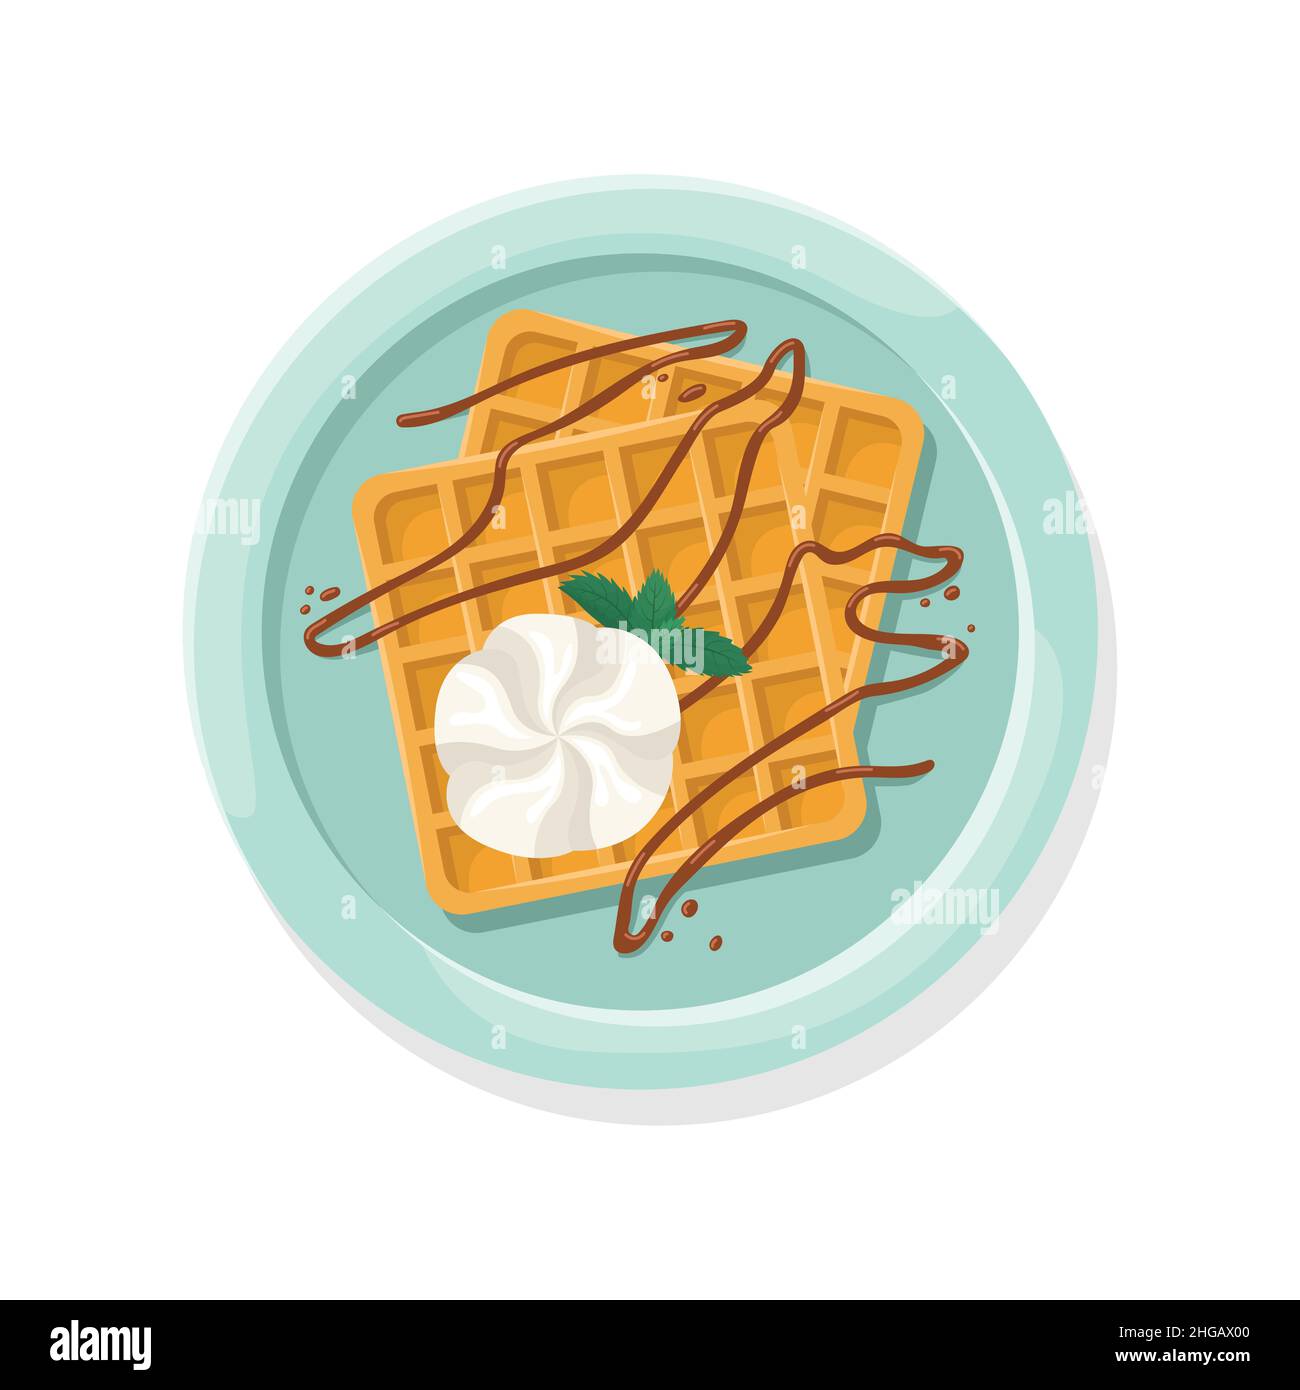 Vector illustration of a Belgian waffle with whipped cream and chocolate sauce. Stock Vector